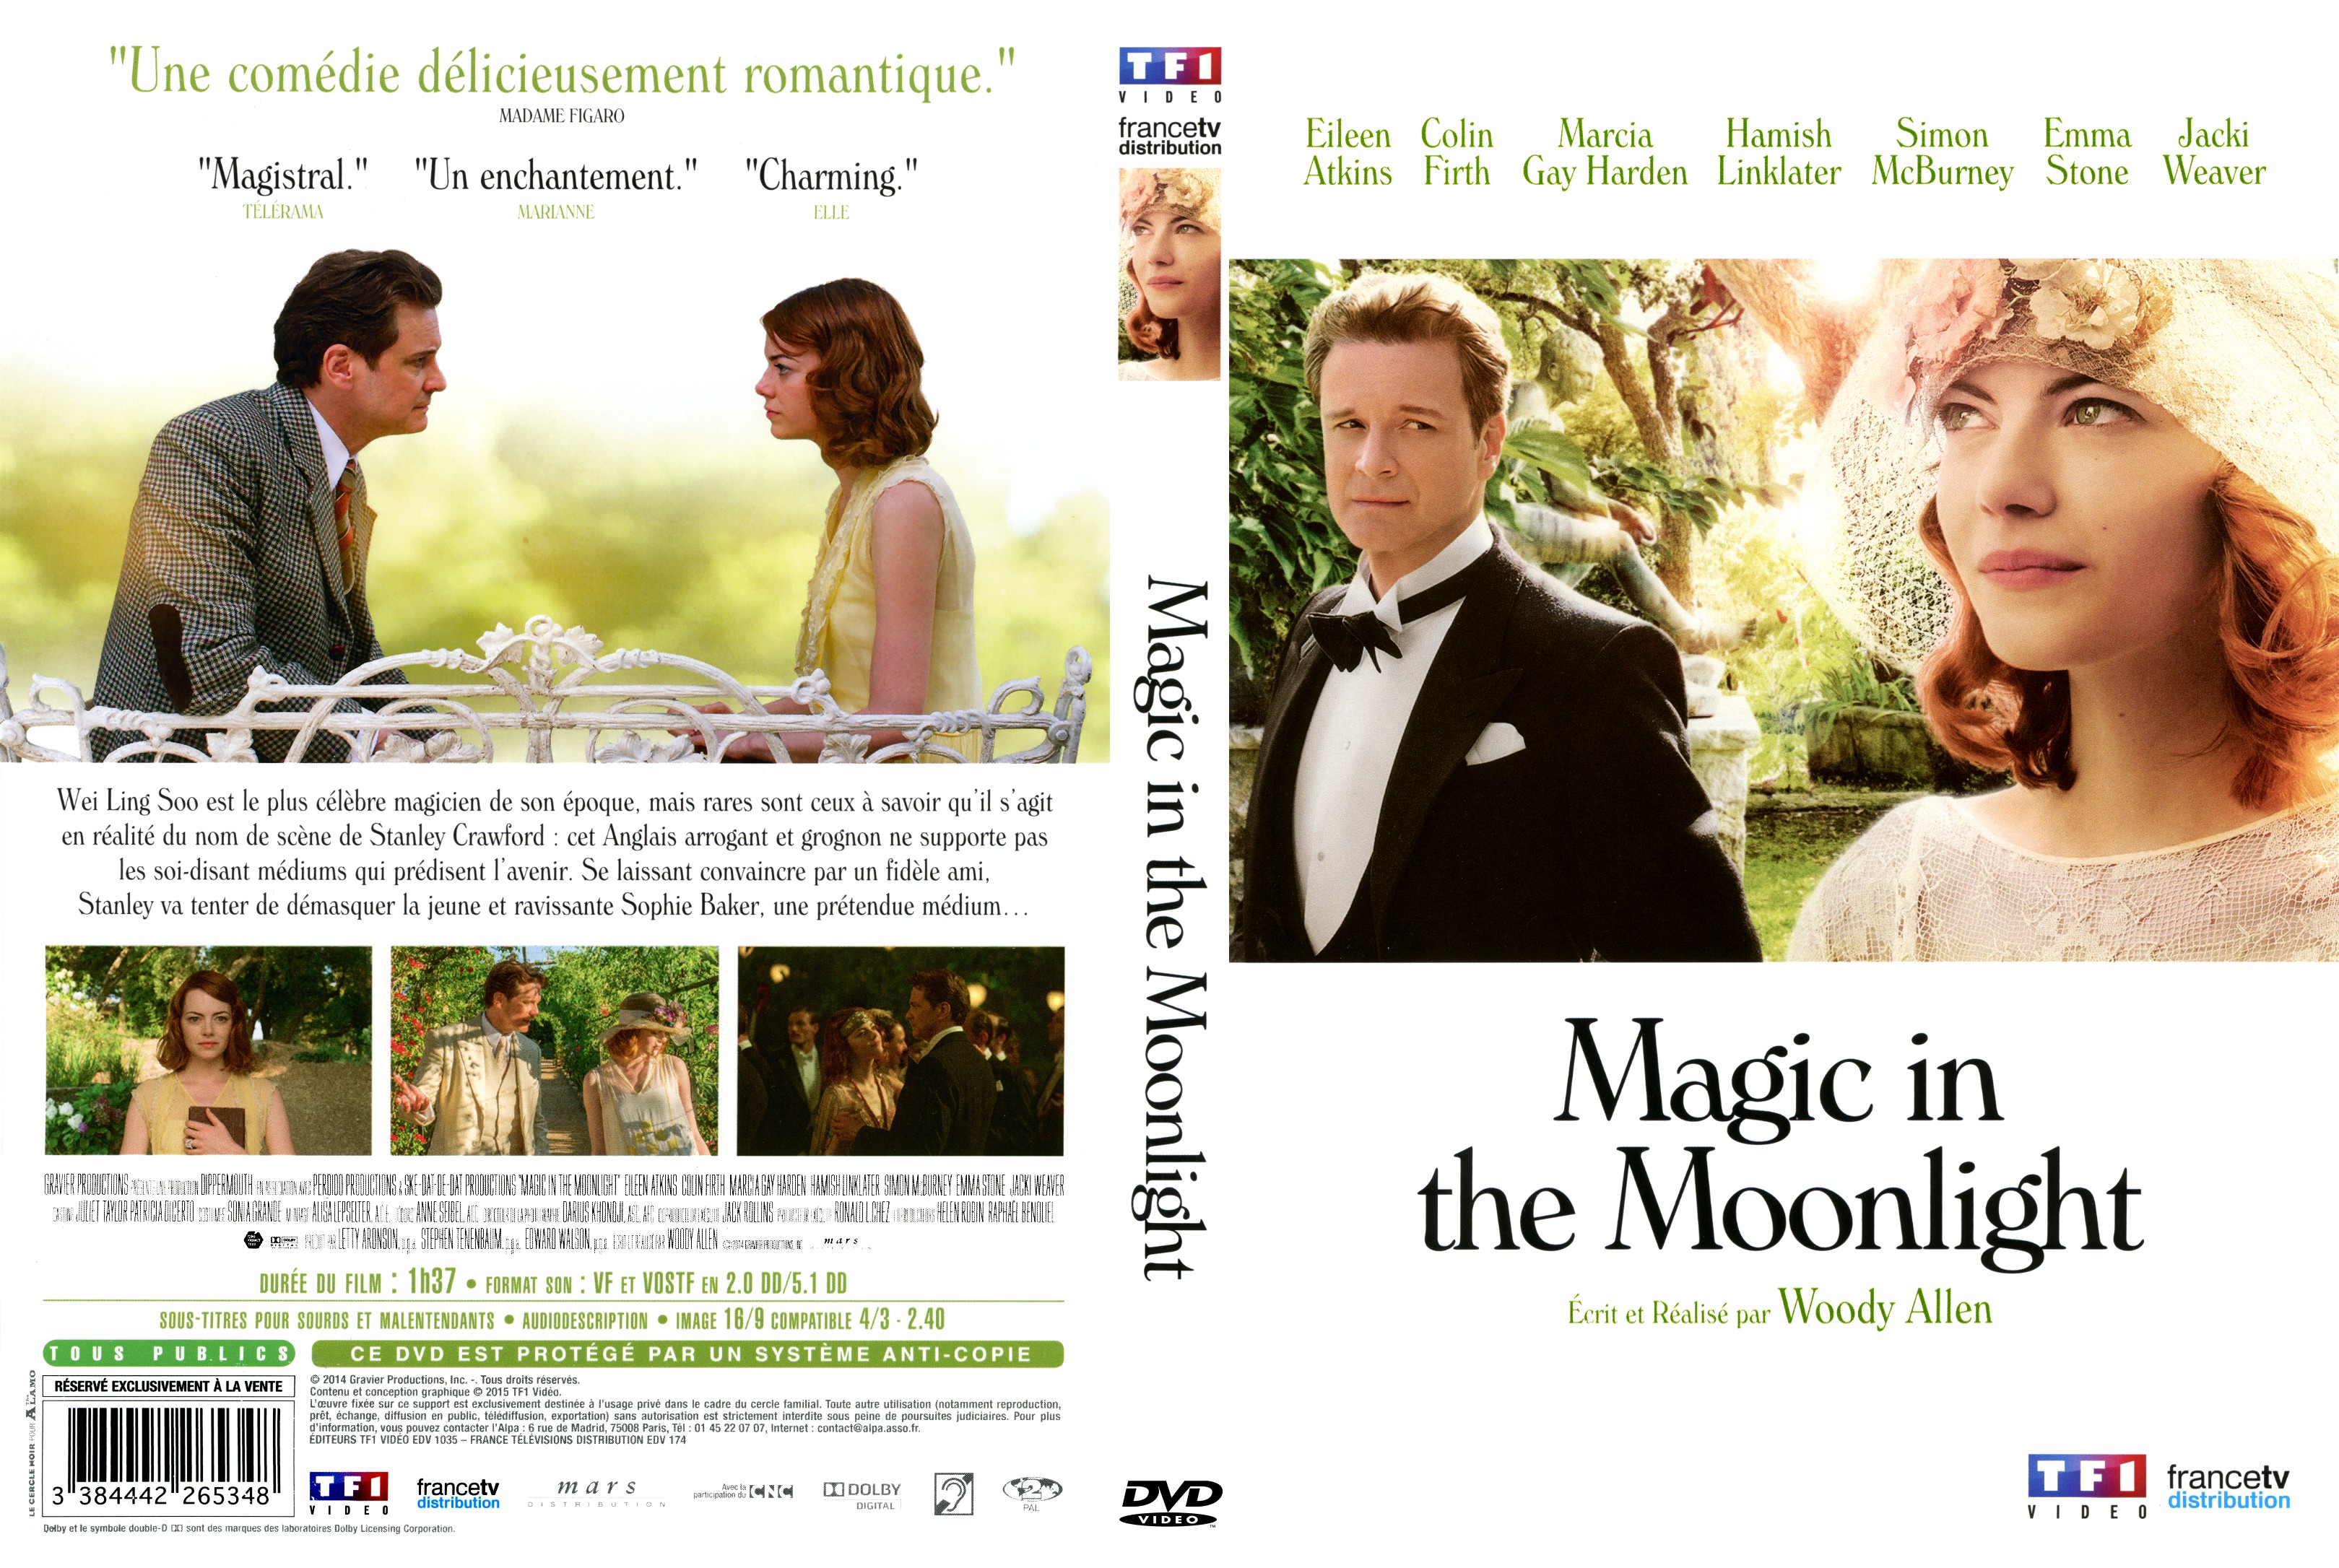 Jaquette DVD Magic in the moonlight